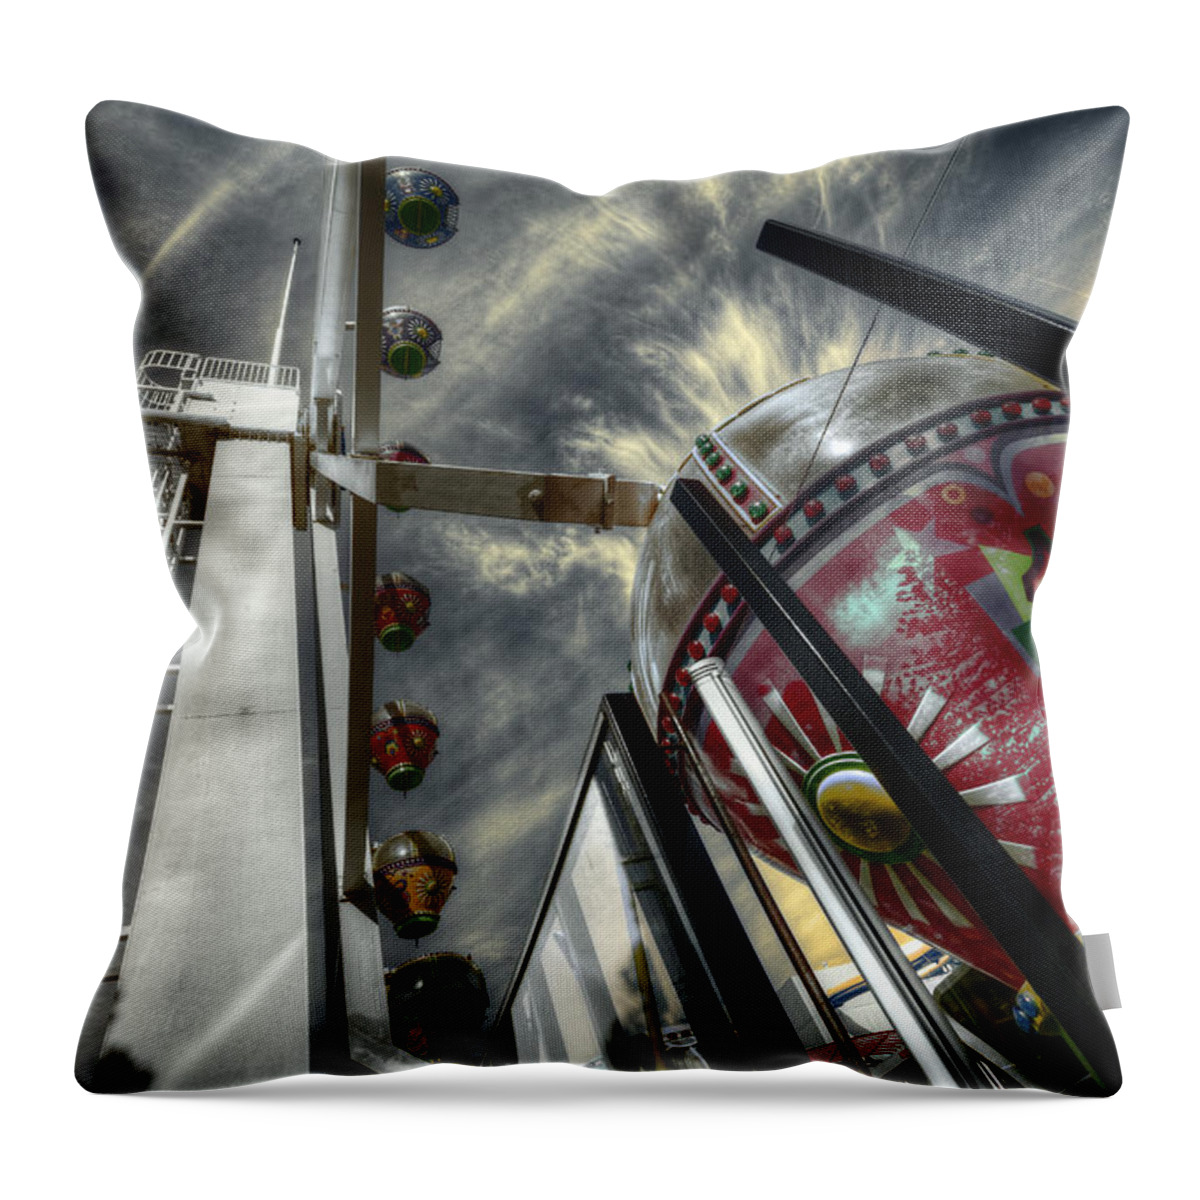 Amusement Throw Pillow featuring the photograph Launch Pad by Wayne Sherriff